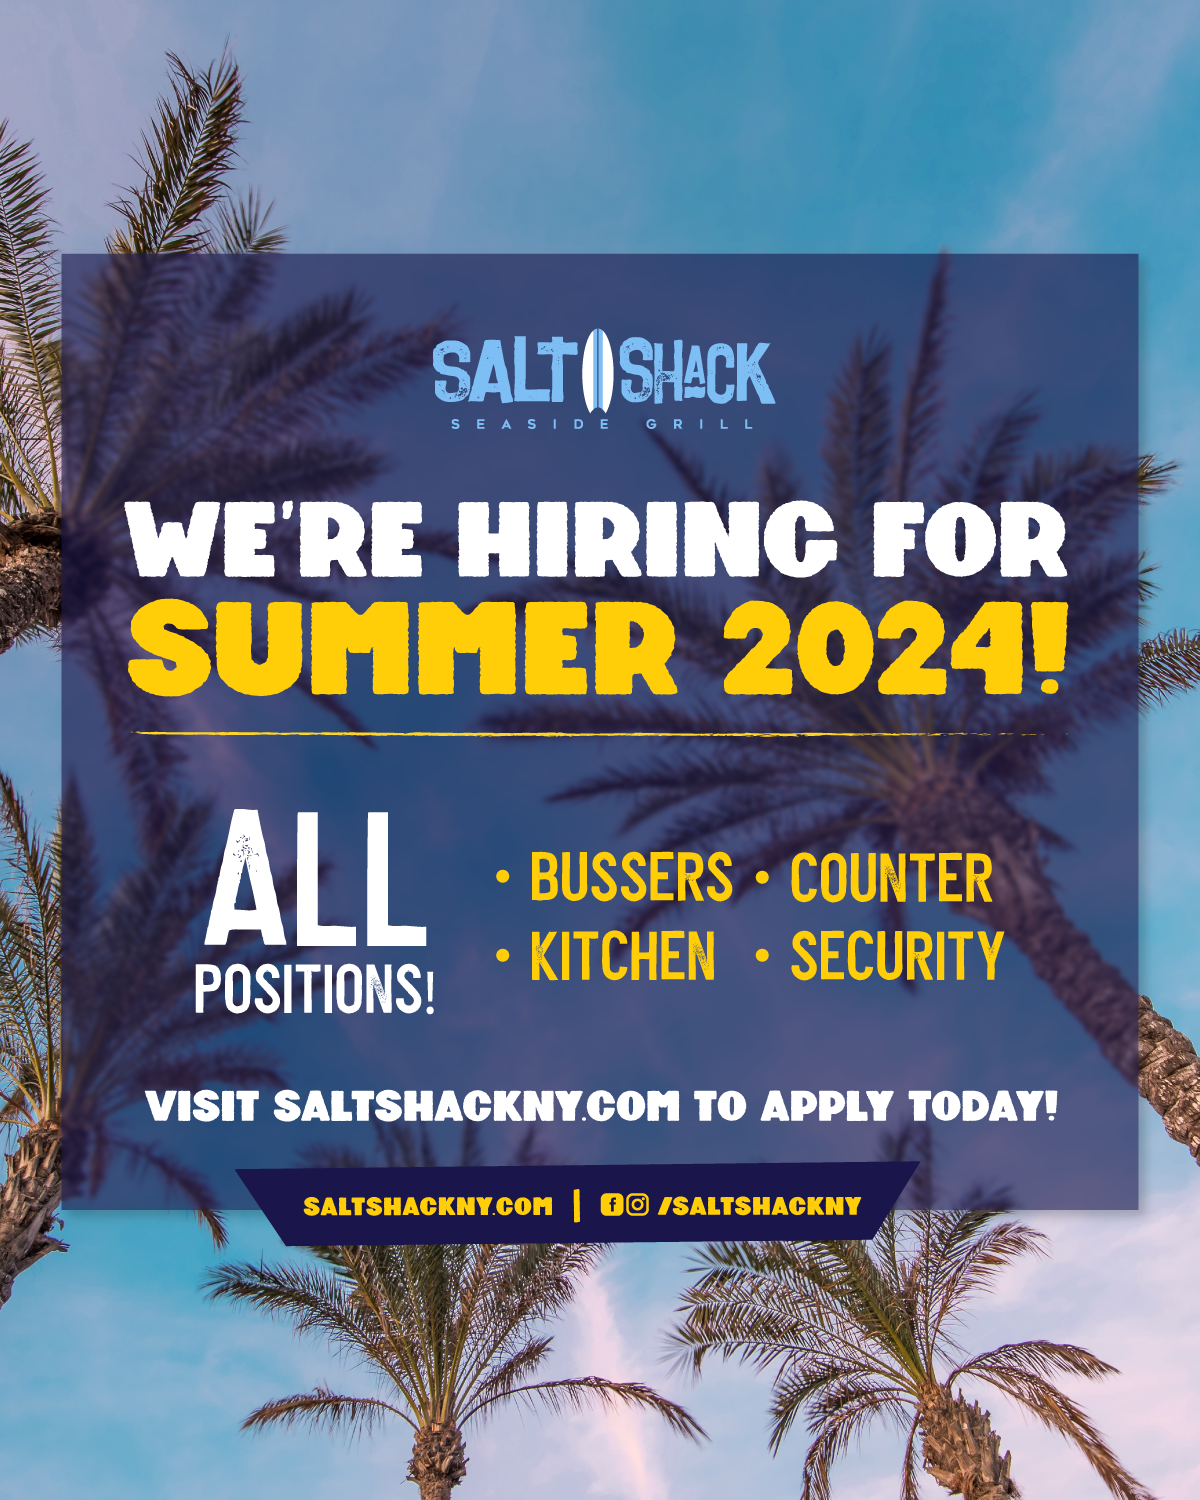 Hiring for Summer 2024! All Positions available! Apply through our website today!